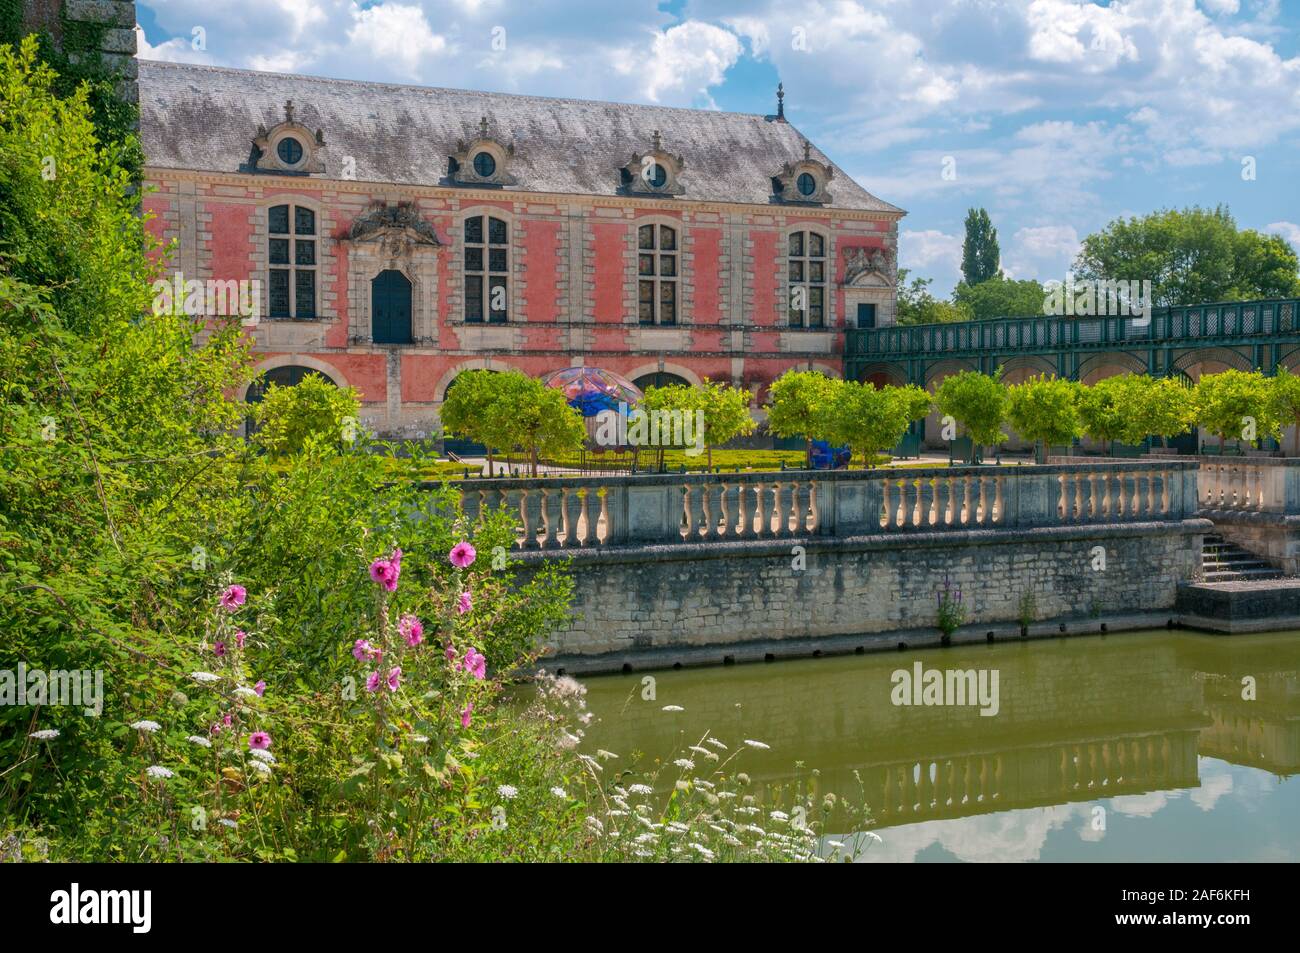 Rear view of the landscaped gardens set on the picturesque site of the Orangerie, a 17th century building, La Mothe-Saint-Heray, Deux-Sevres, France Stock Photo